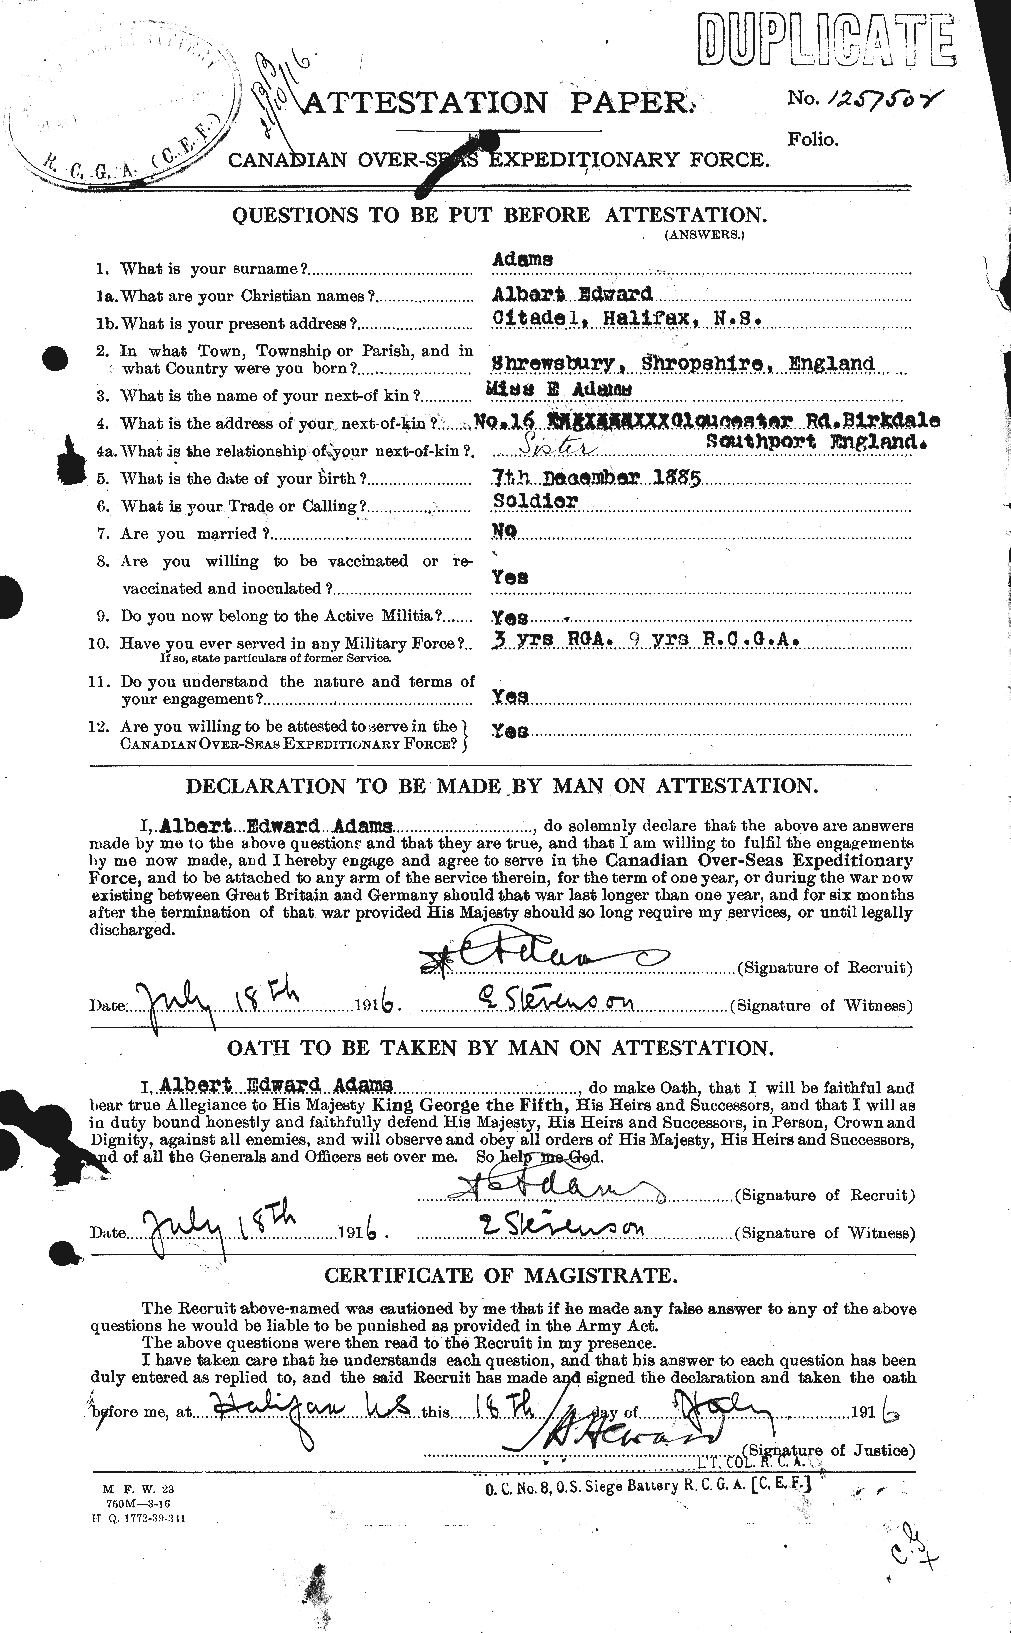 Personnel Records of the First World War - CEF 201363a